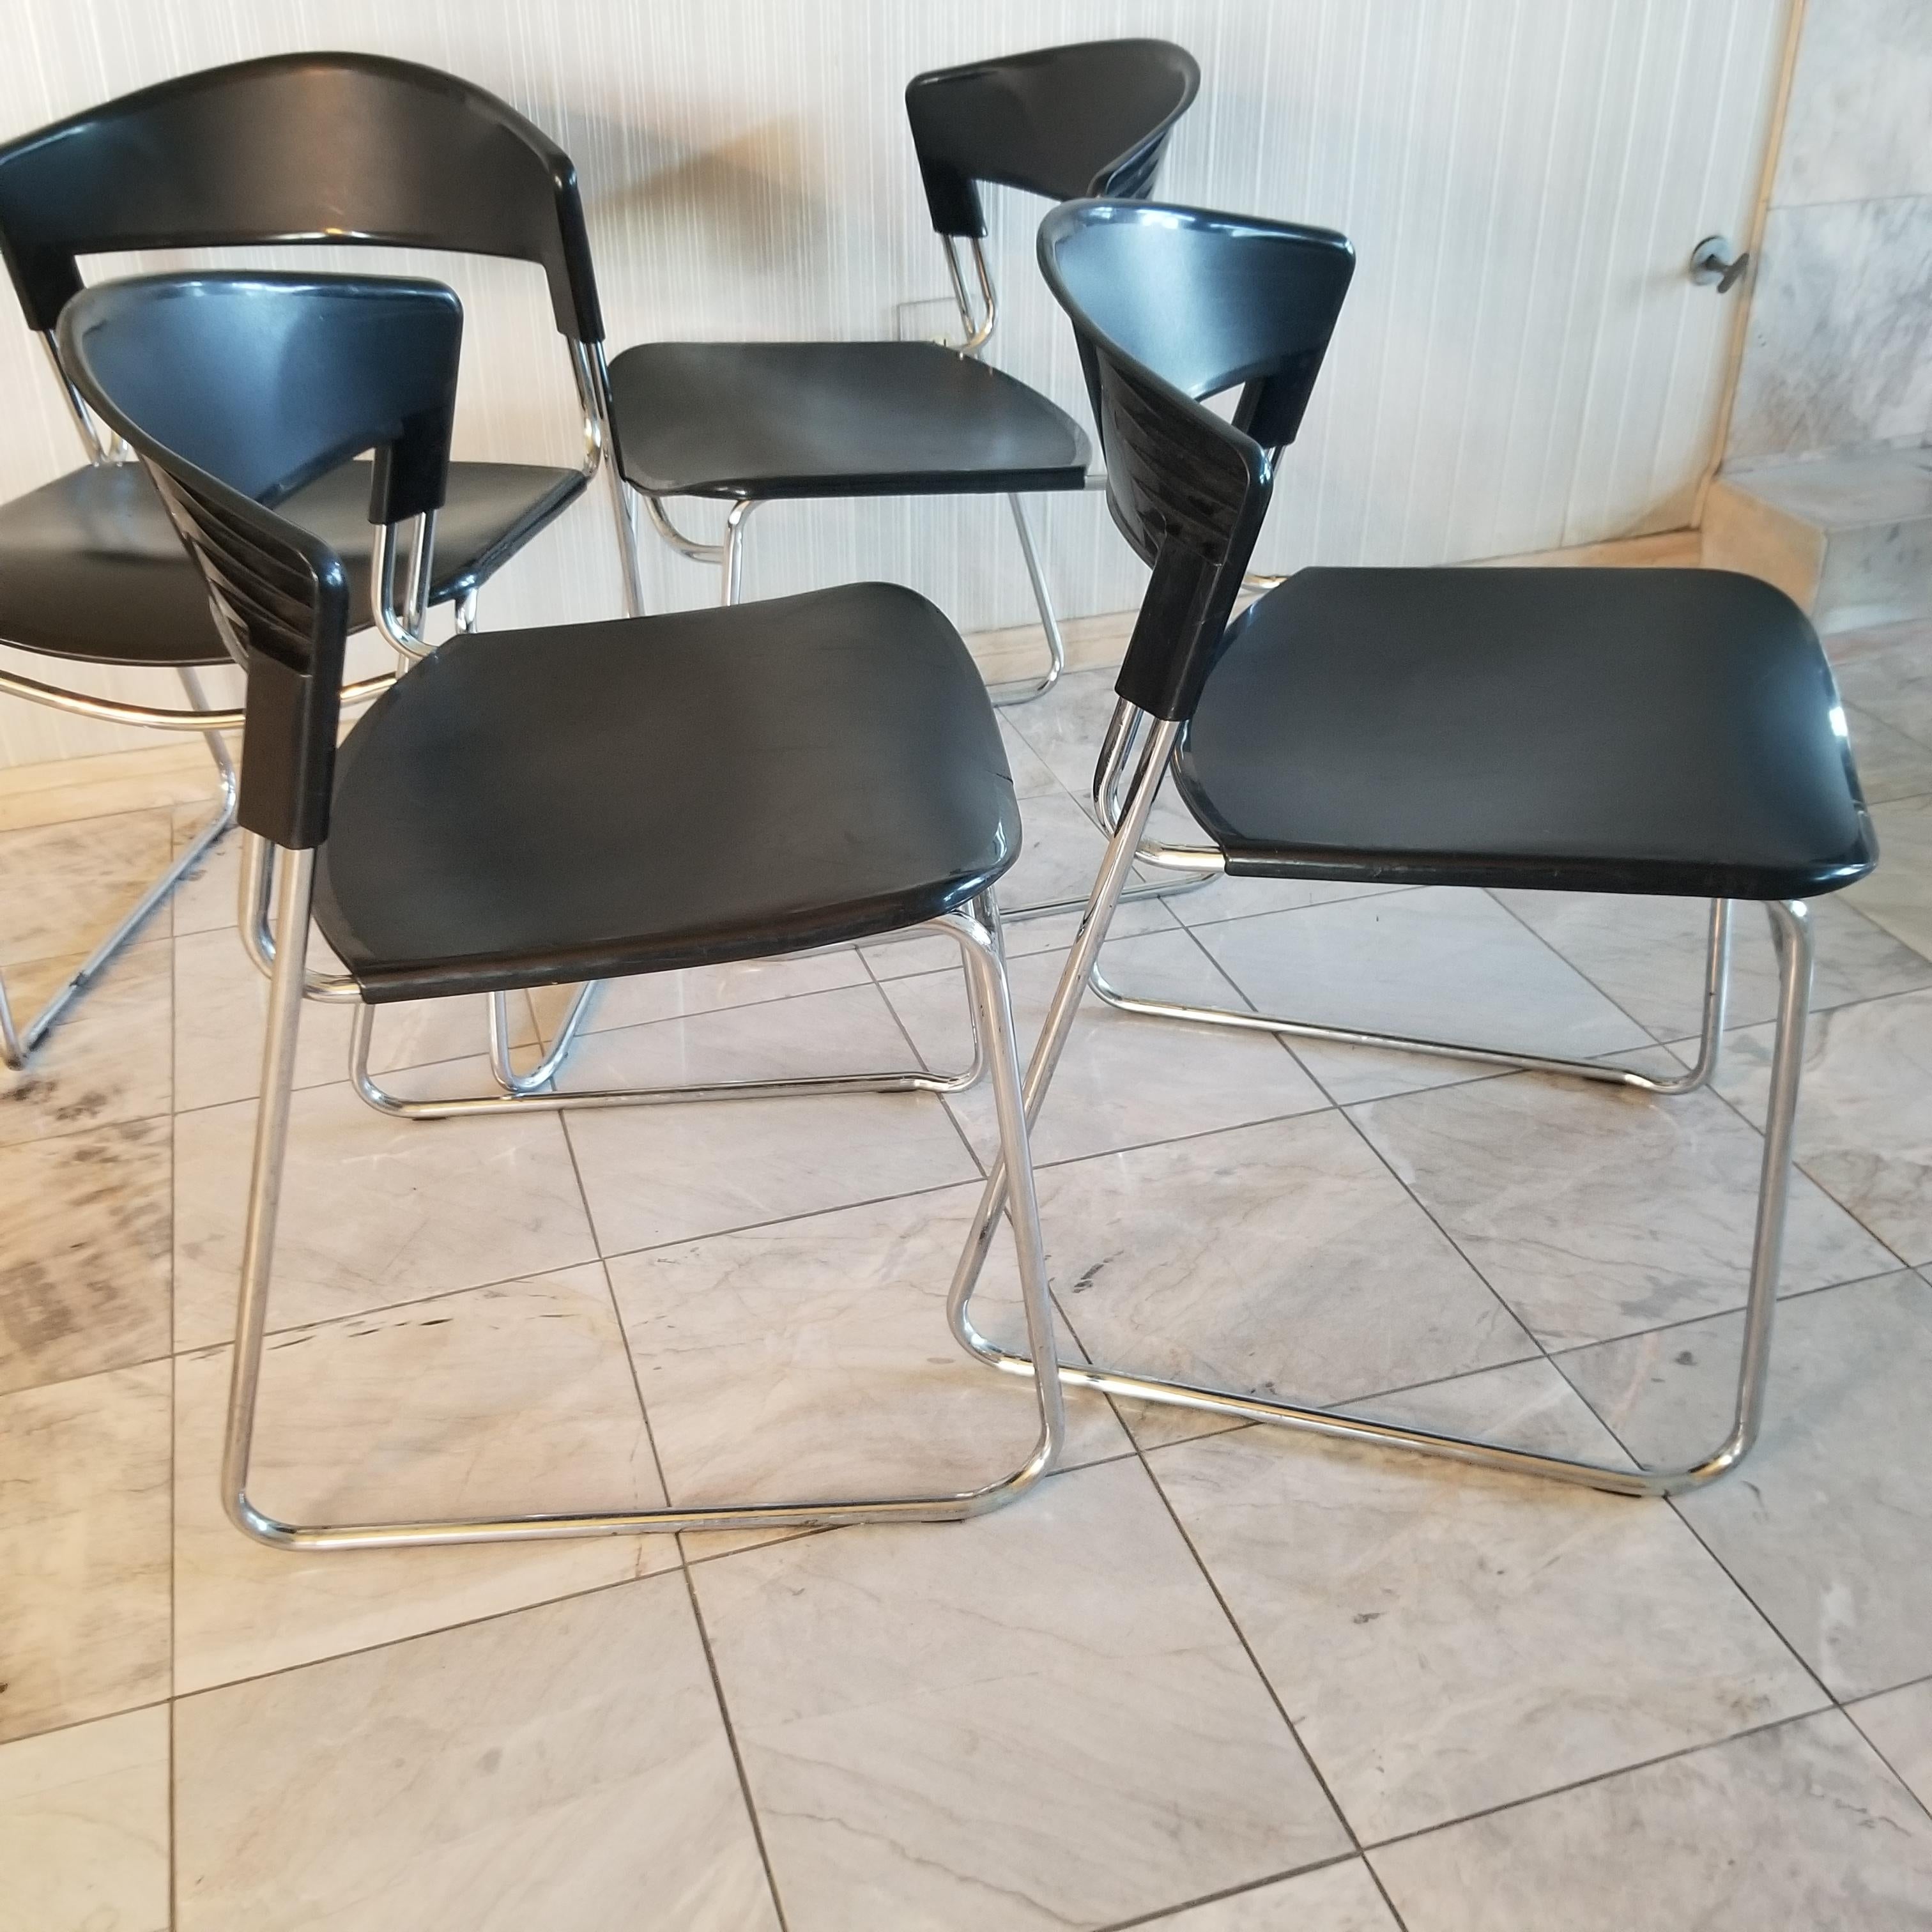 ITALY Paolo Favaretto  Post Modern Tubular Chrome Chairs Stacking Assisa  1986 1